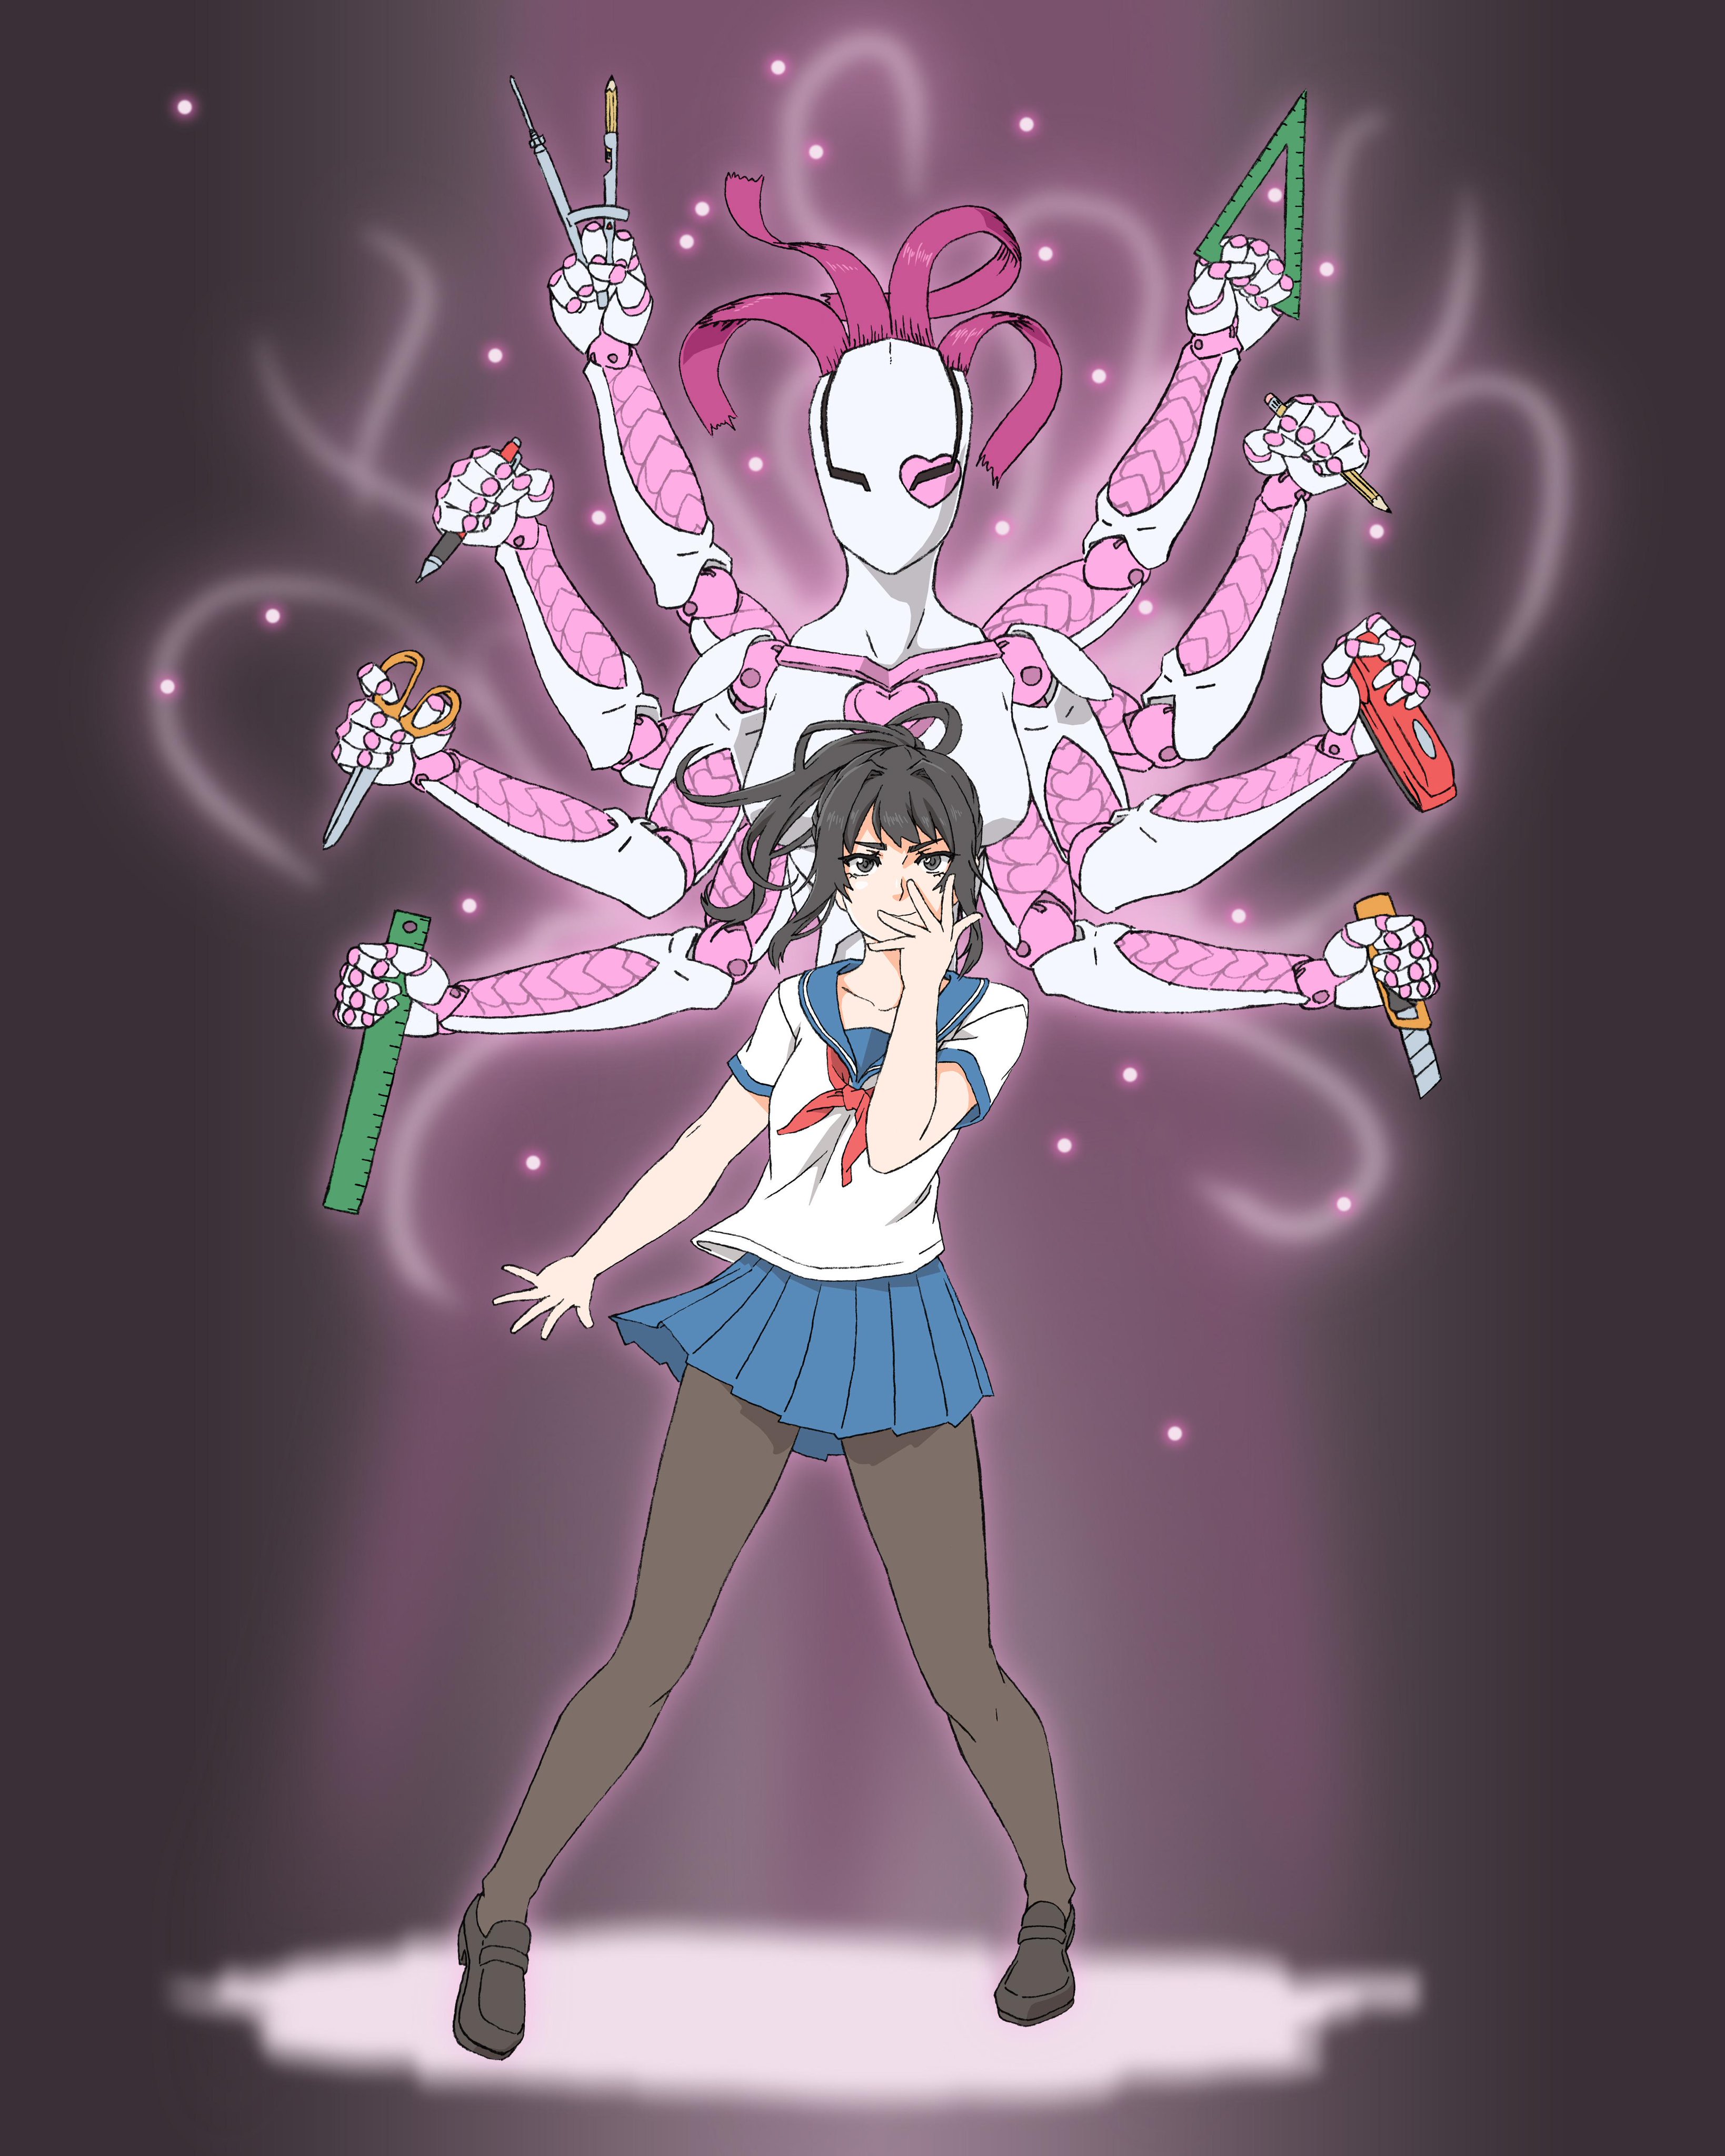 Praise the Yandere Queen! image - Anime Fans of modDB - Mod DB